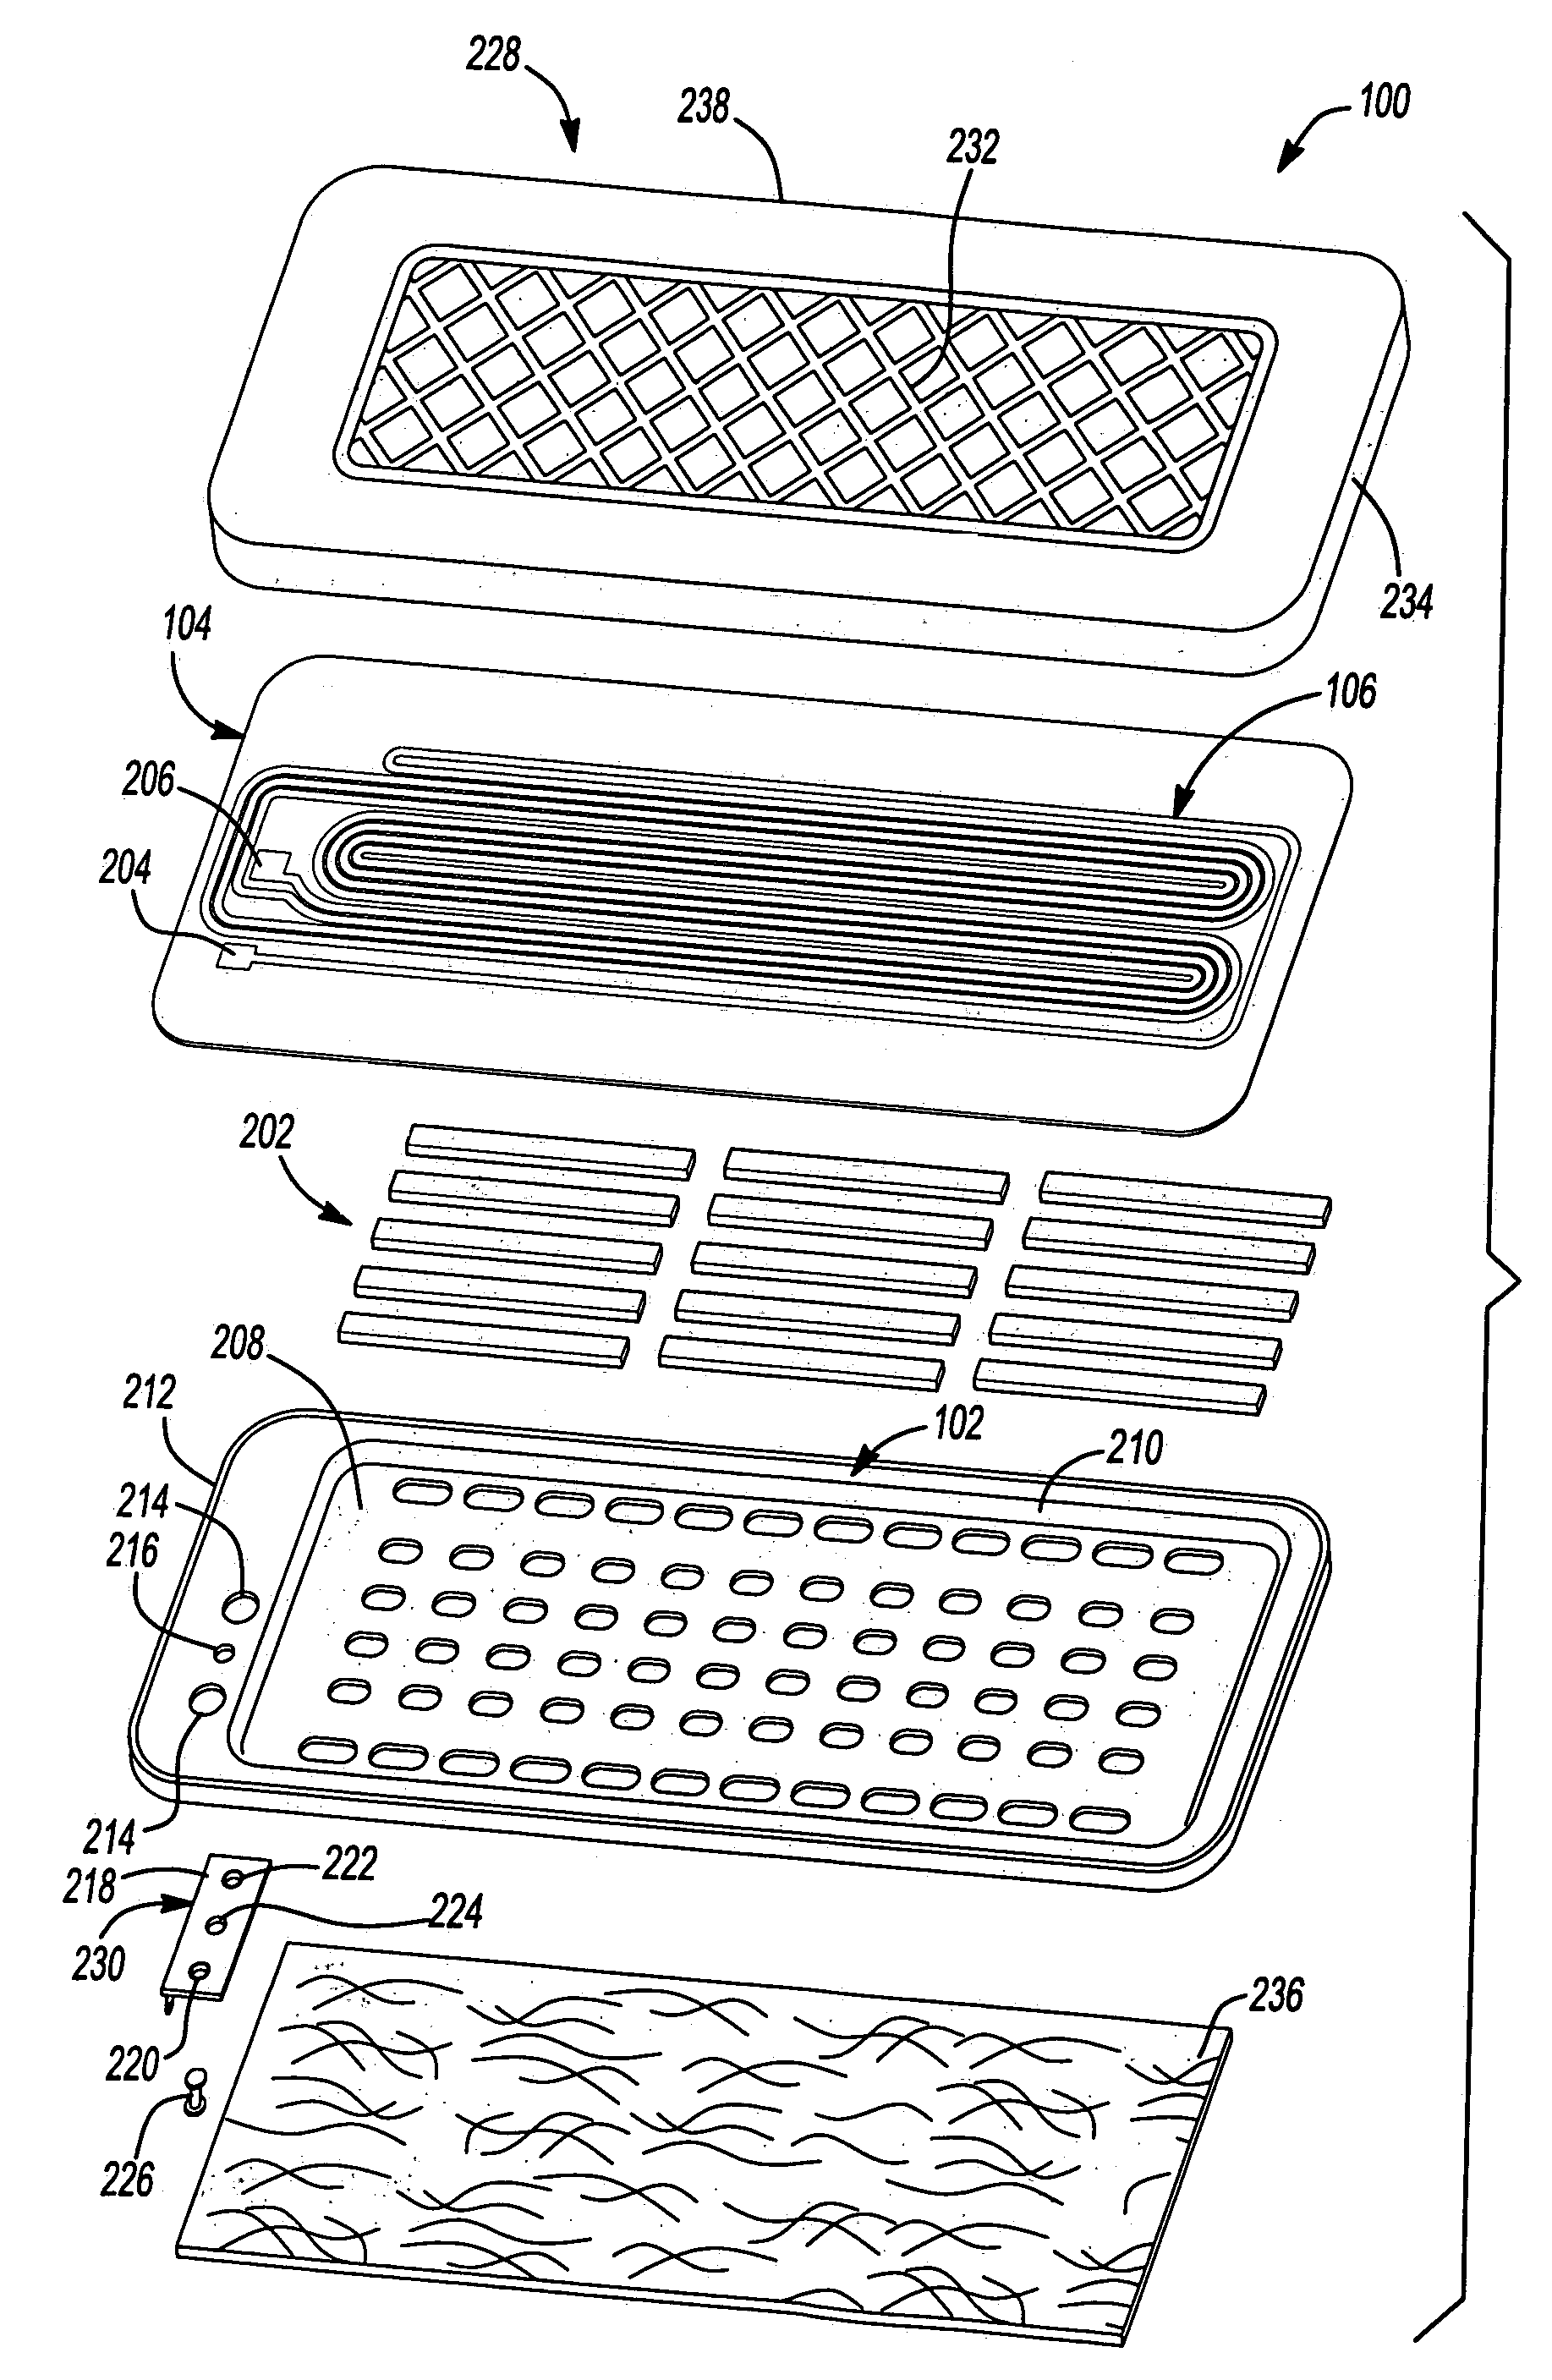 Method of tensioning a diaphragm for an electro-dynamic loudspeaker